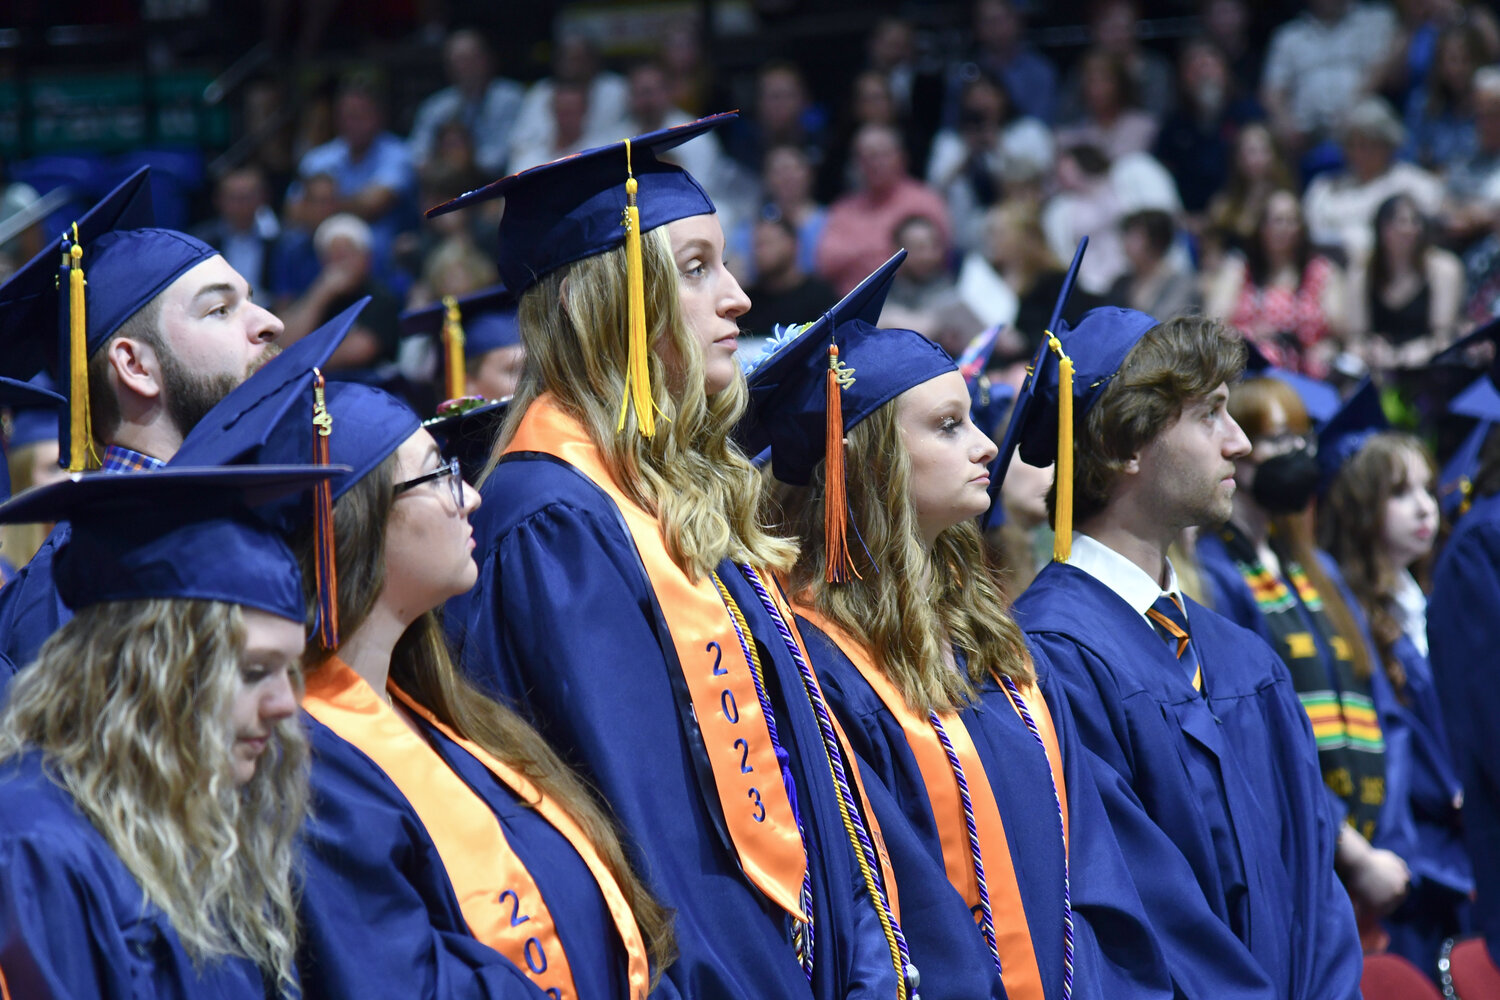 Students stand and look on as Utica University's 74th undergraduate commencement ceremony takes place.